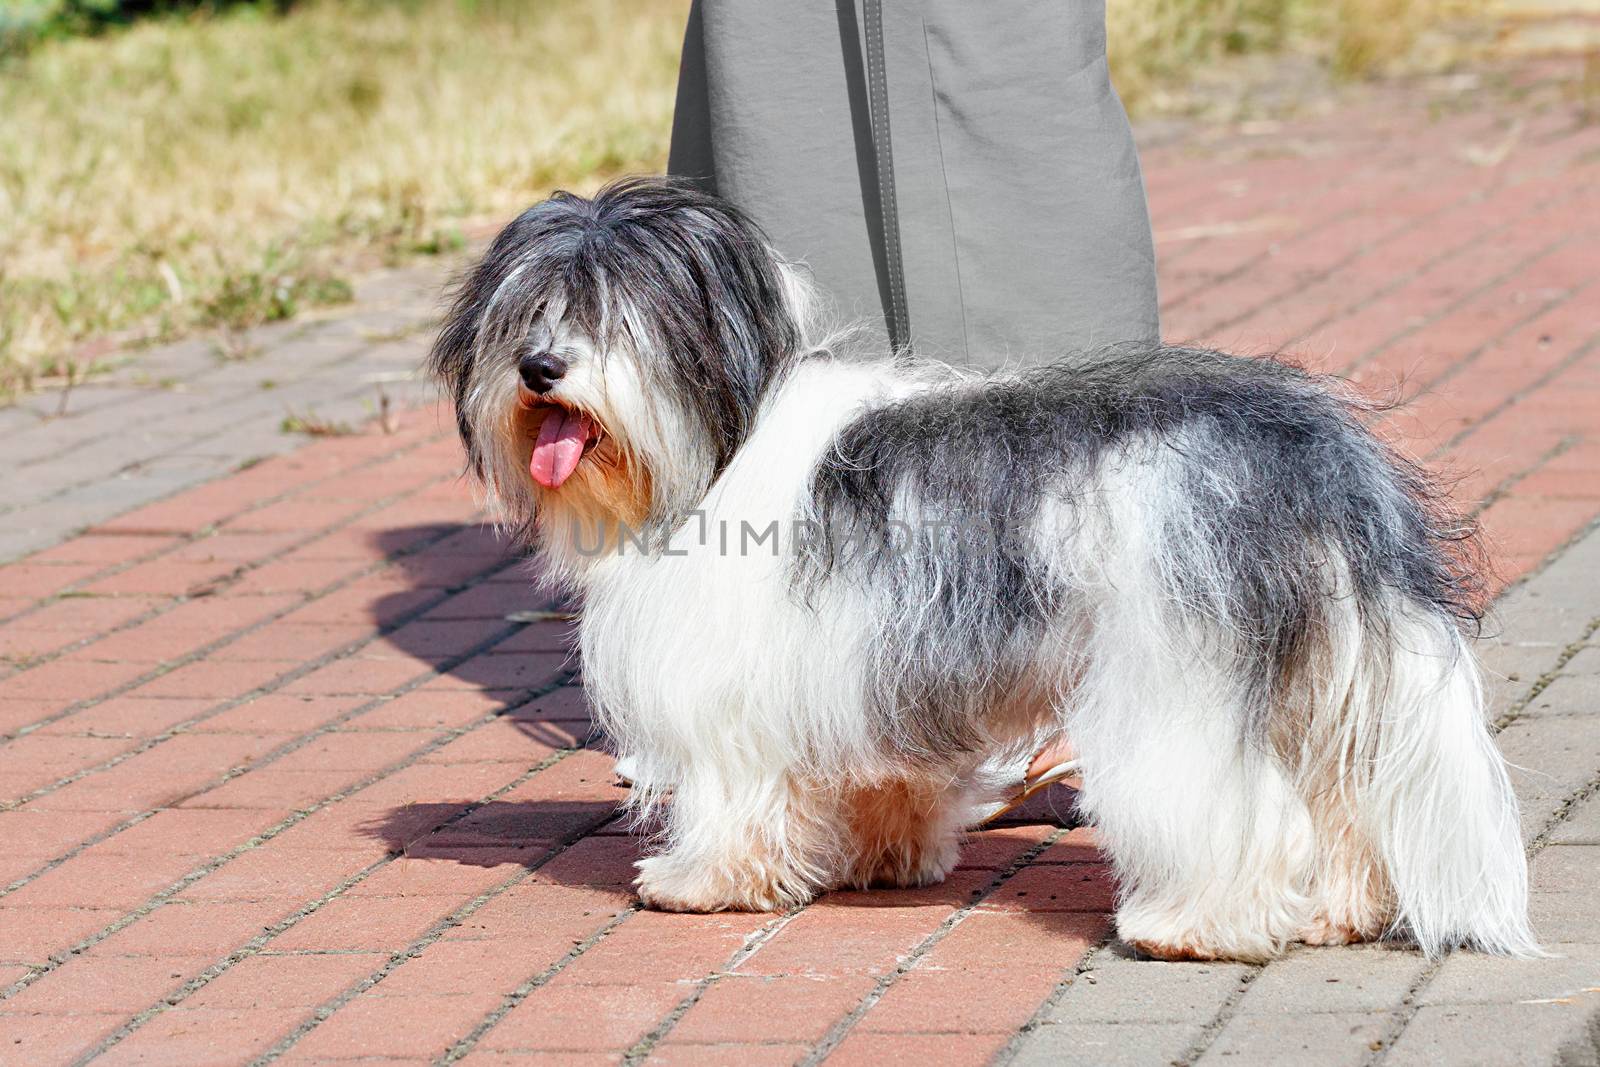 A fluffy Havanese bichon with a protruding red tongue stands in the park near the hostess against the background of the sidewalk on a bright sunny day, image with copy space.